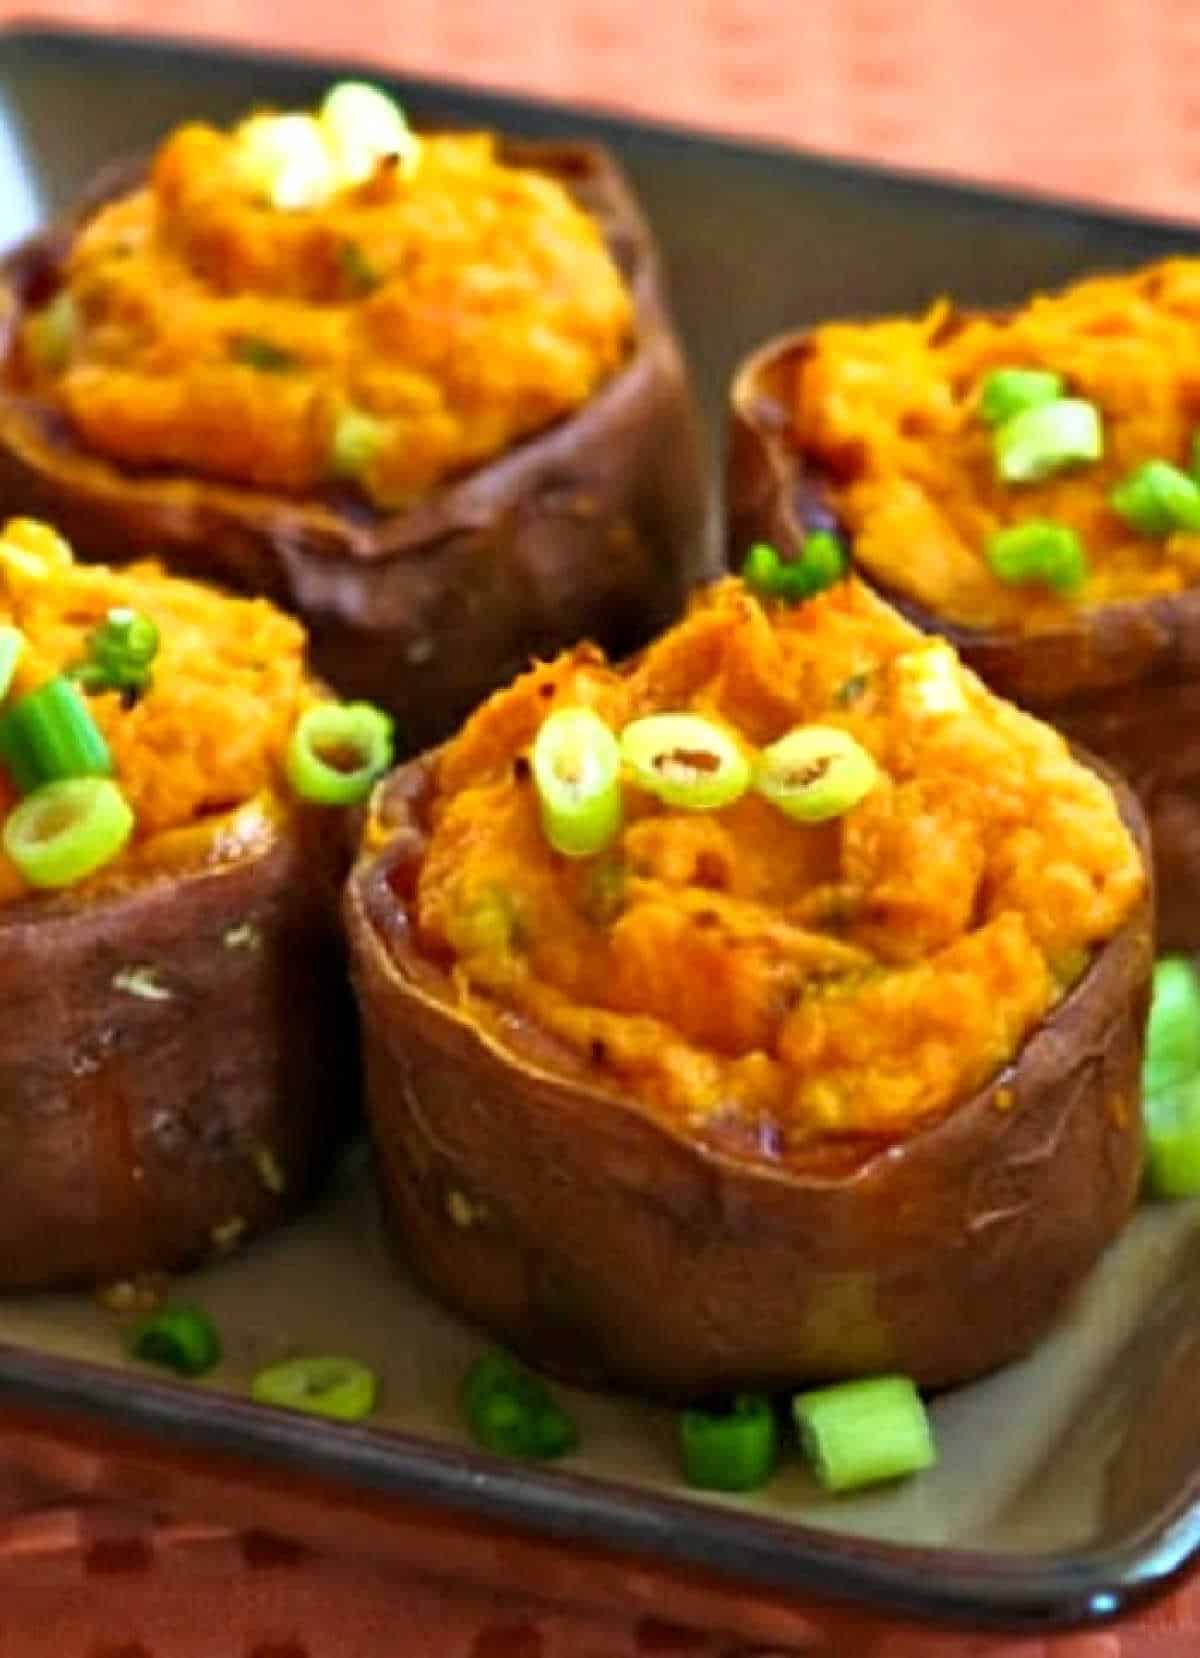 Twice-Baked Sweet Potatoes shown on serving plate